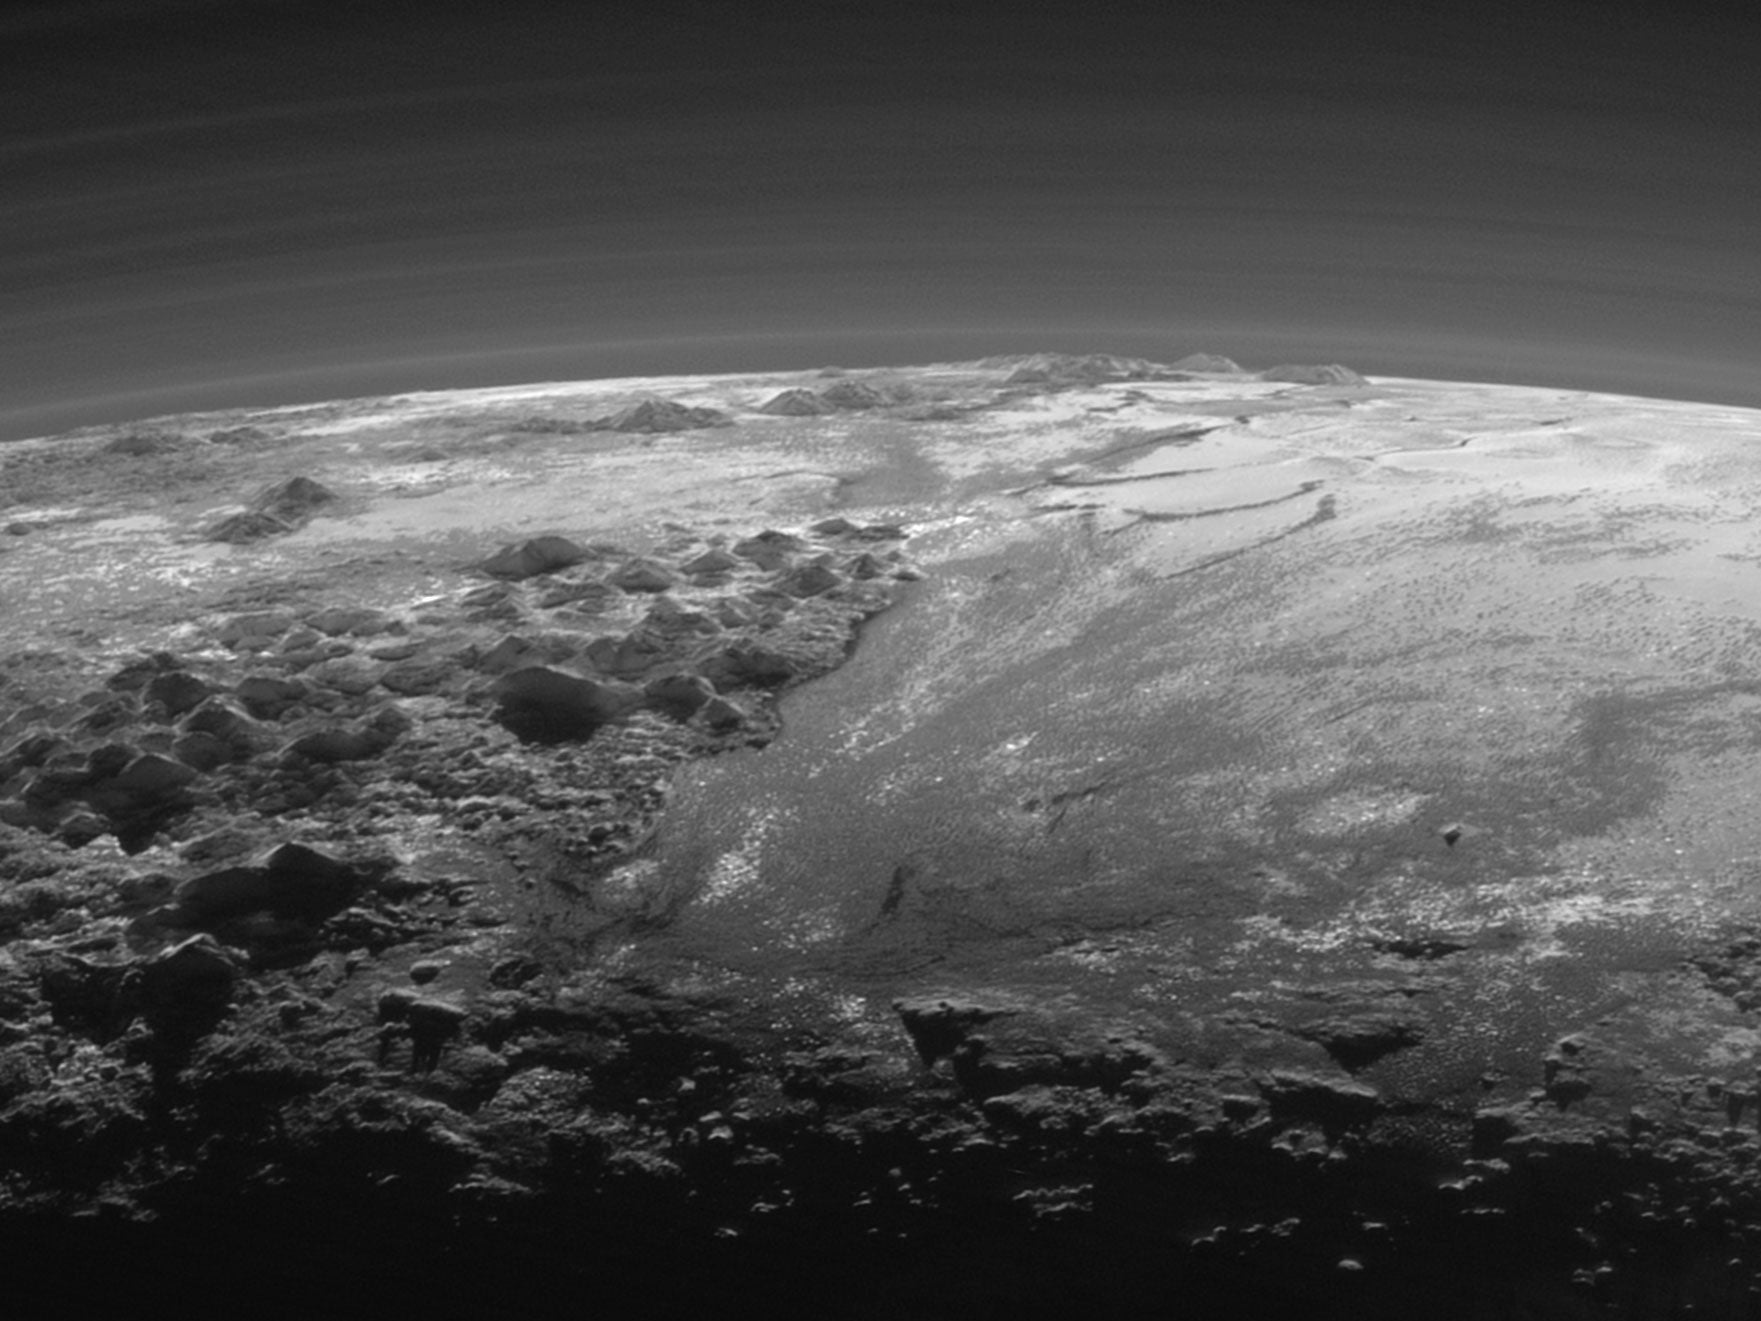 New Horizons took this image on its closest approach to Pluto on 14 July 2015, showing mountains and flat ice plains